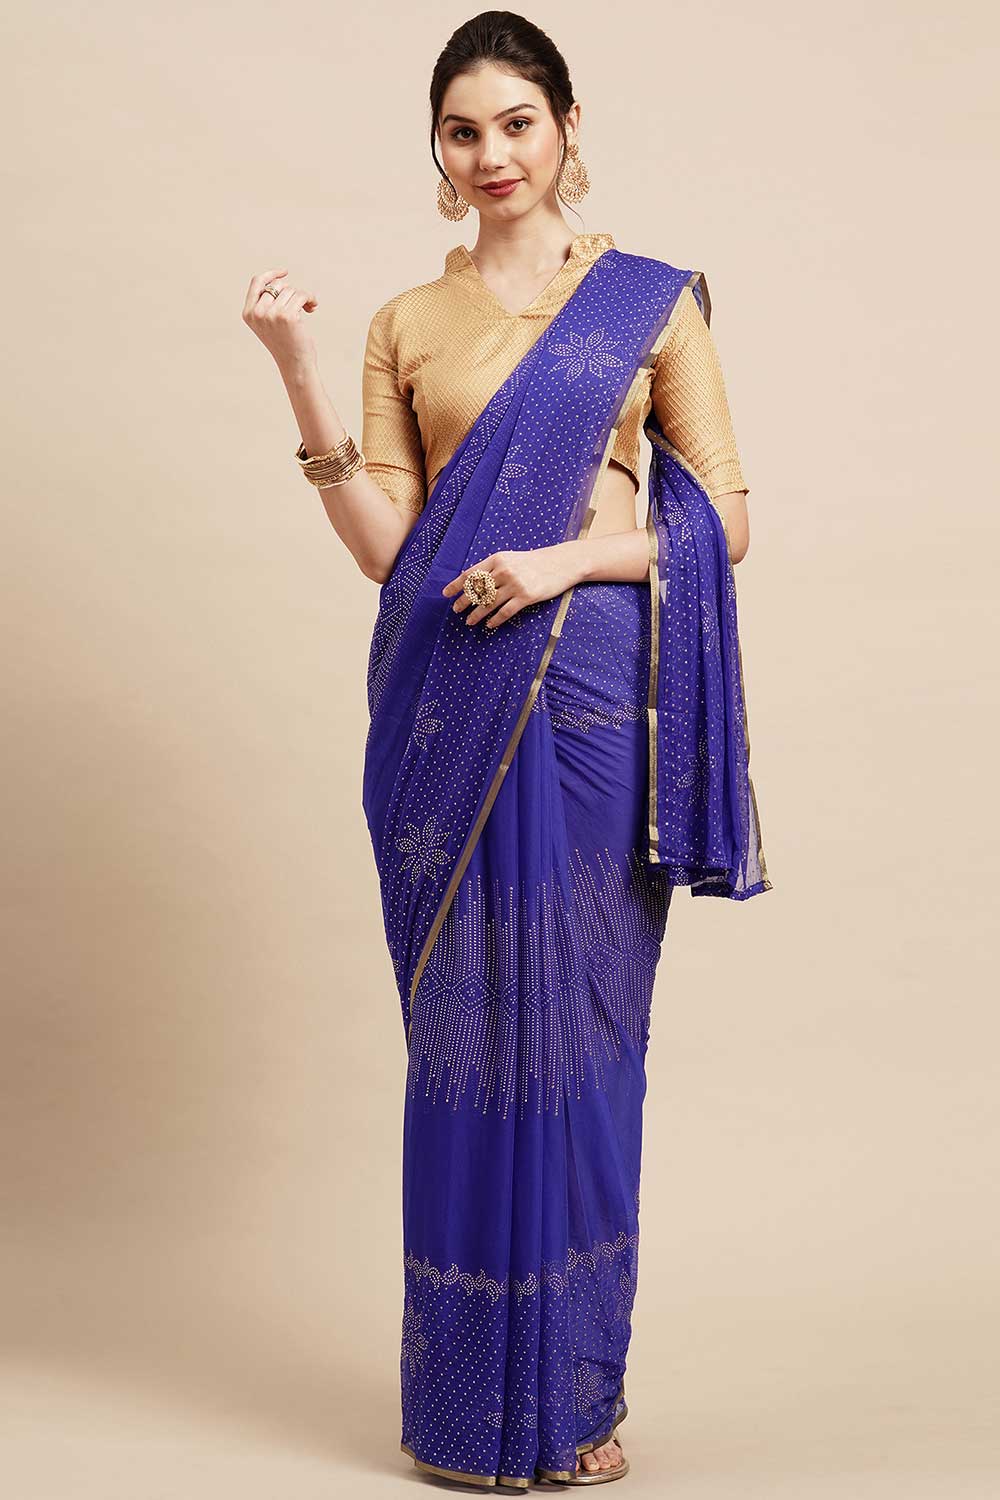 Buy Lorie Blue Chiffon Floral Embellished One Minute Saree Online - One Minute Saree